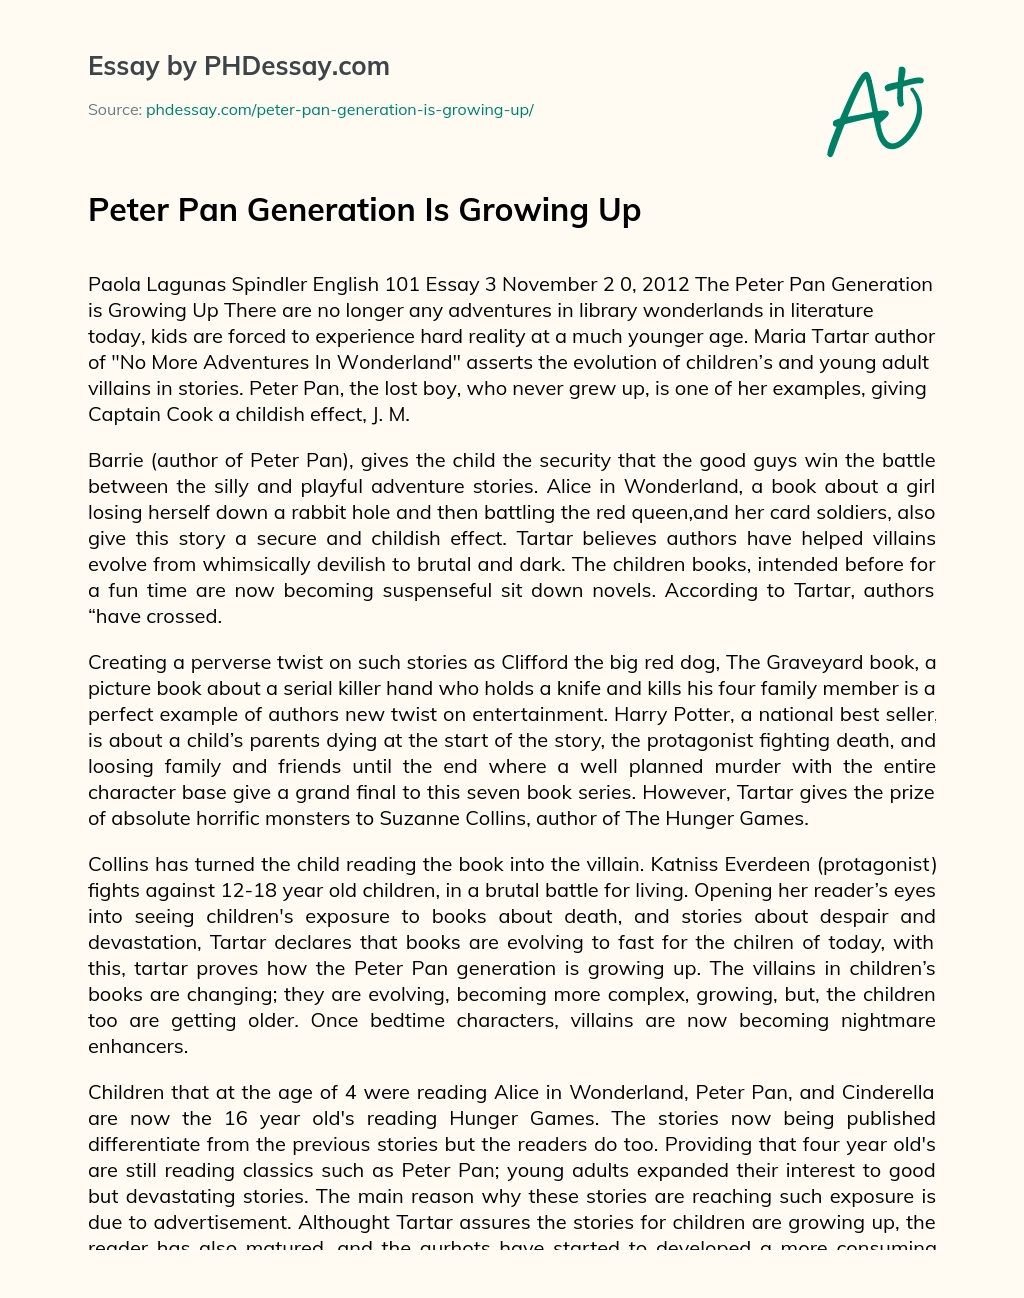 Peter Pan Generation Is Growing Up essay